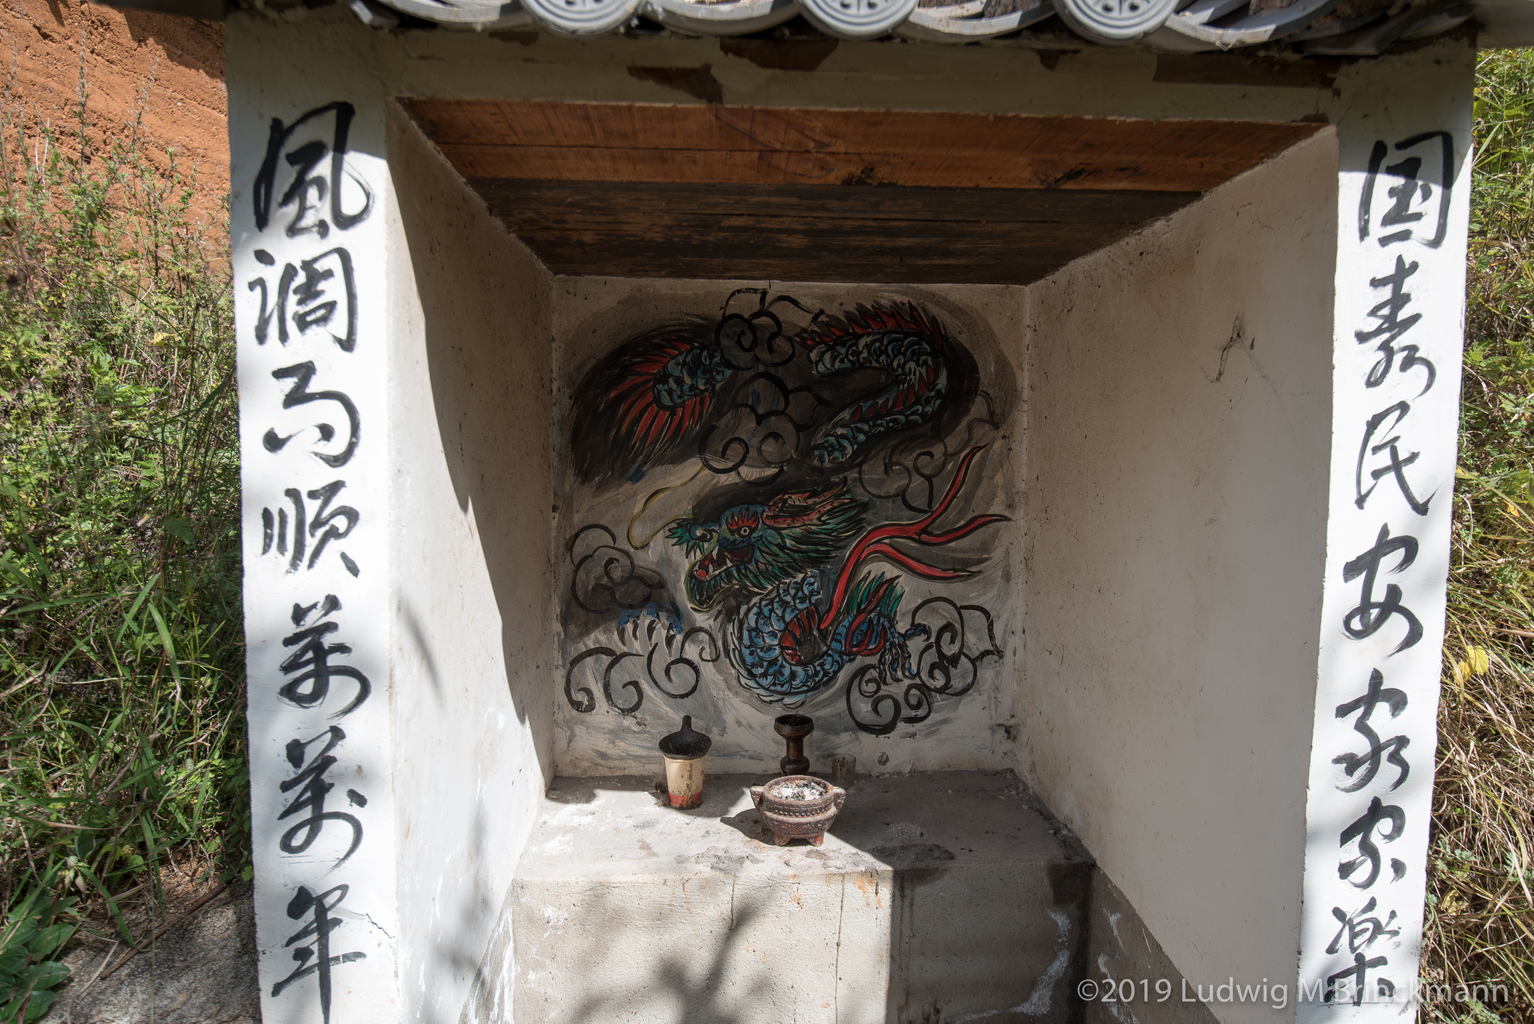 Picture: Fengyu Basin Benzhu Temple.